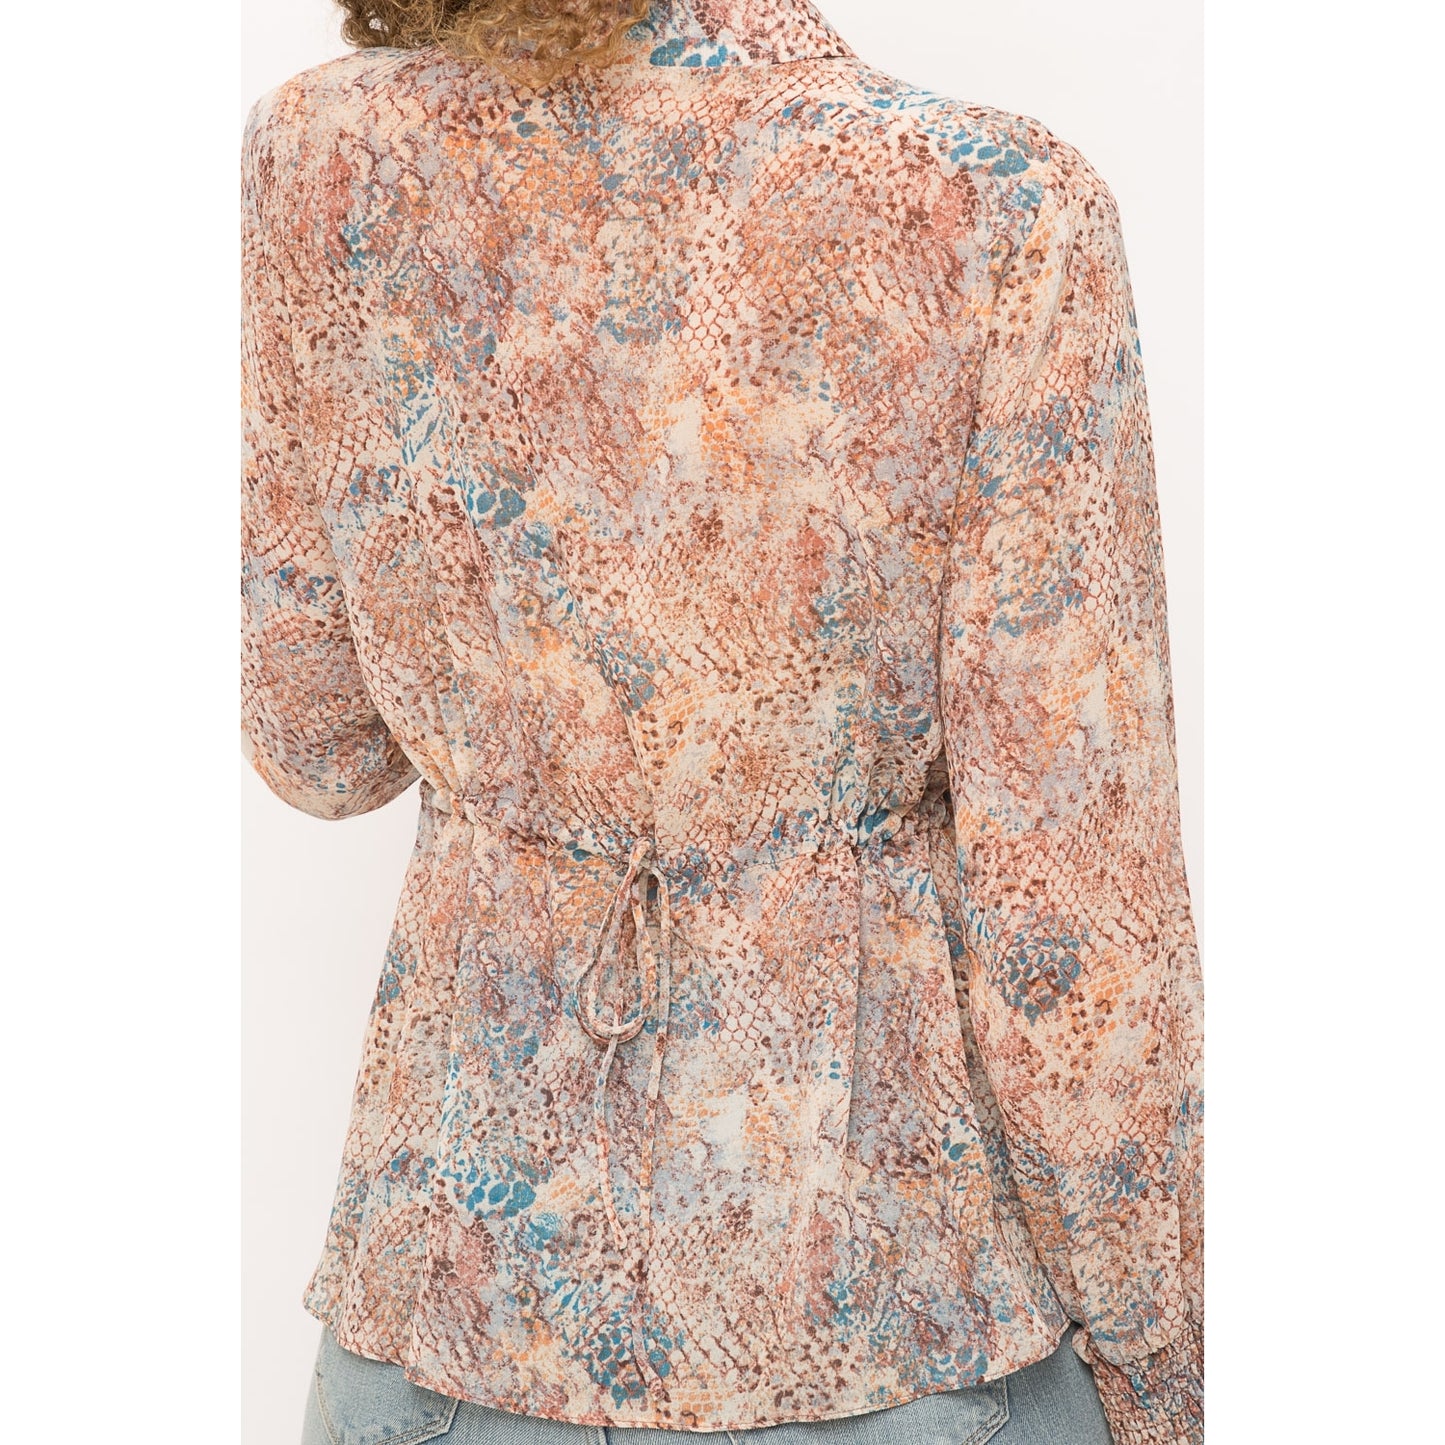 Snake Print Tie Back Pleated Shirt - Wild Luxe Boutique